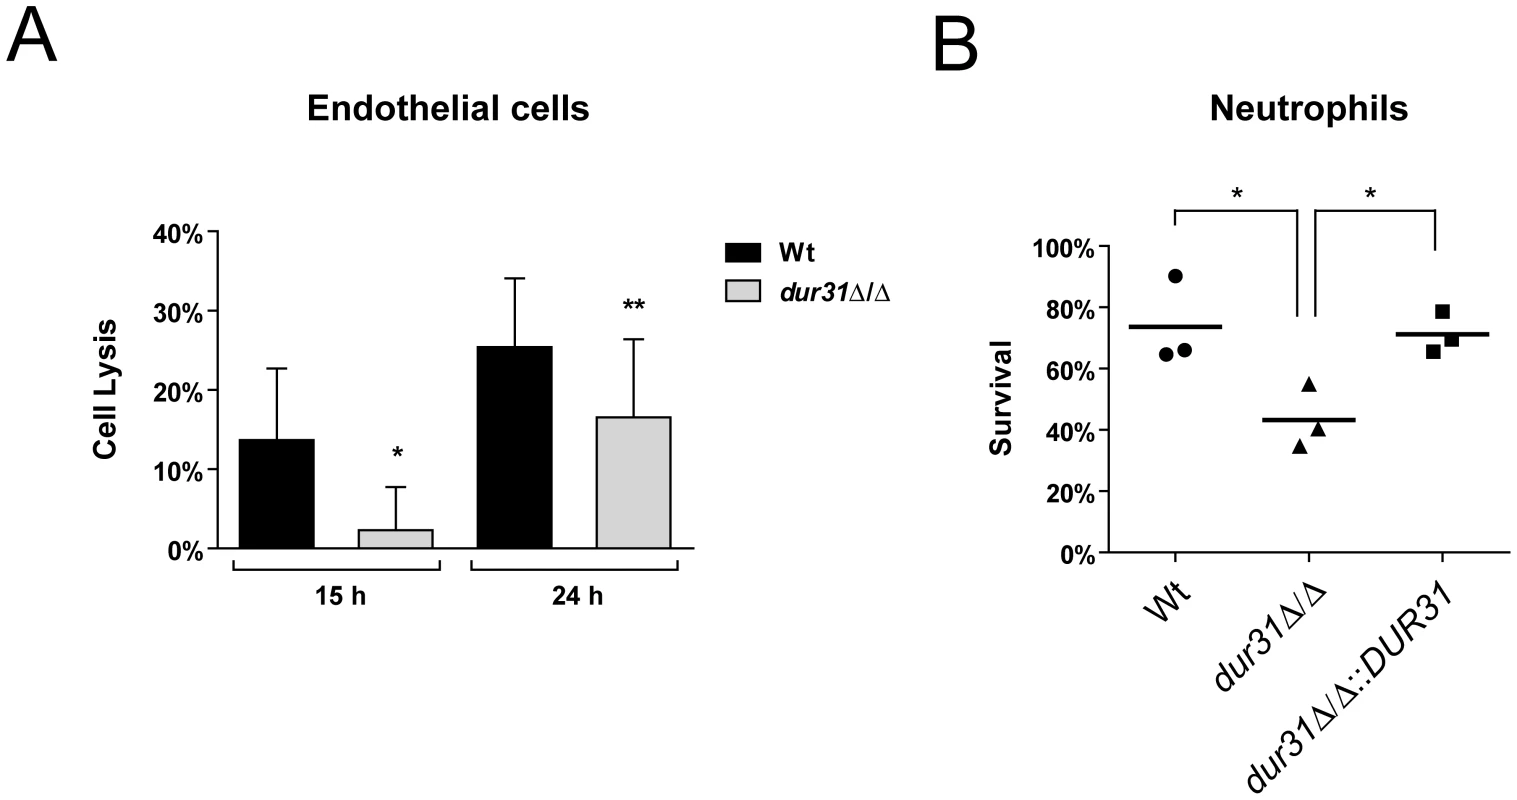 Dur31 is required for damage of human endothelial cells and for immune evasion.